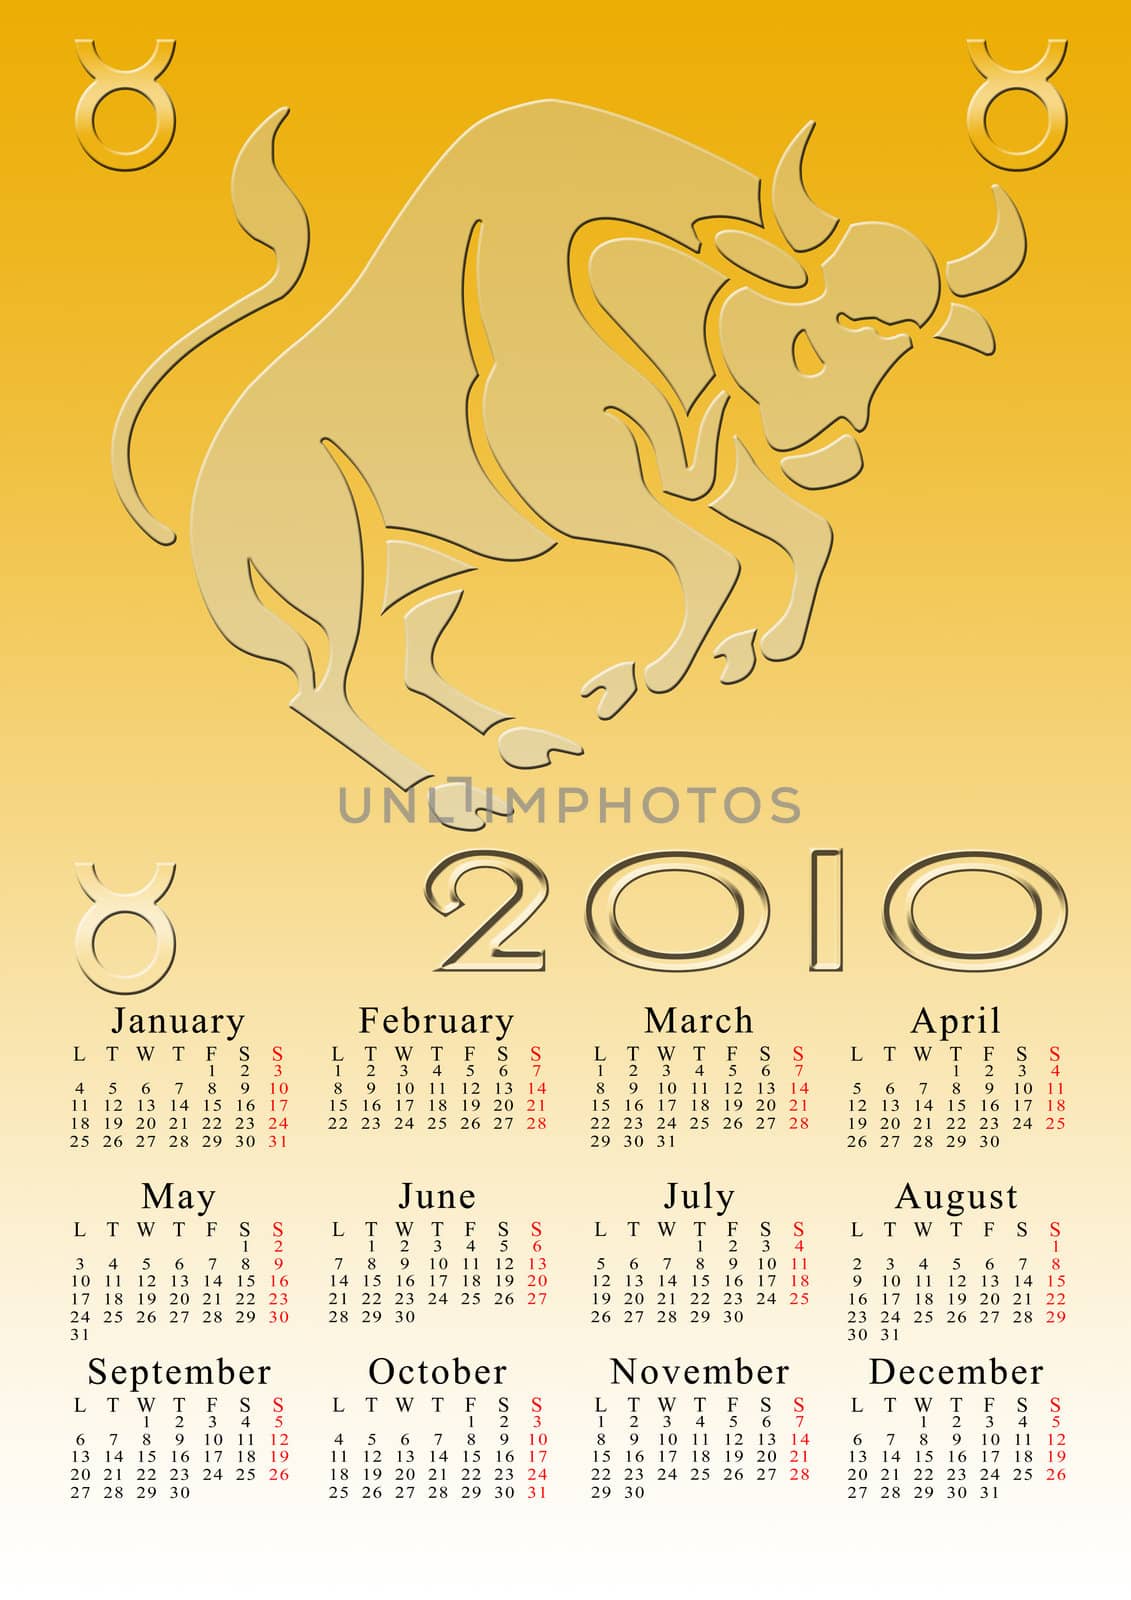 taurus. calendar for the year 2010 with the astrological sign
